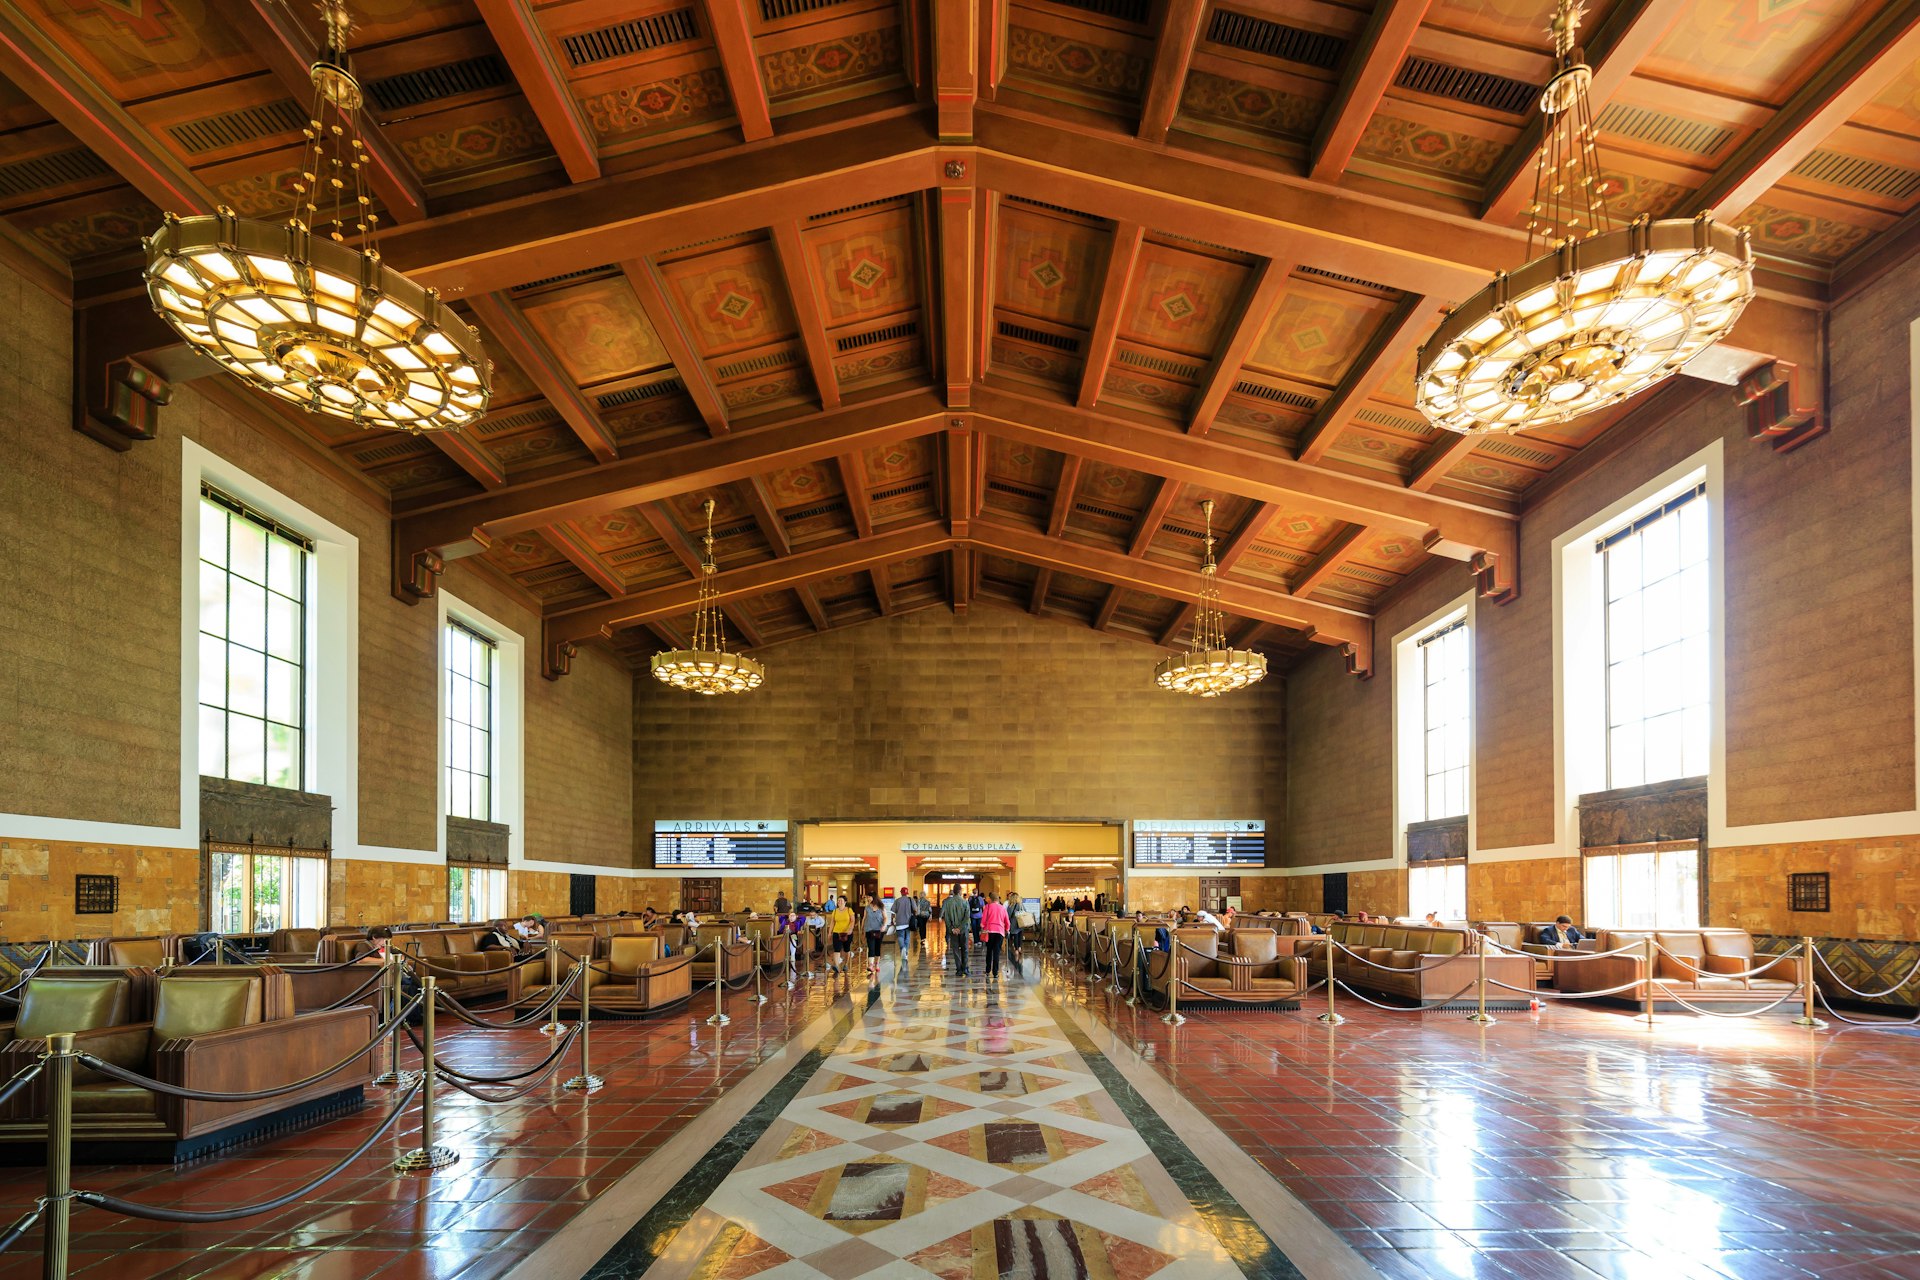 The historical union station Los Angeles